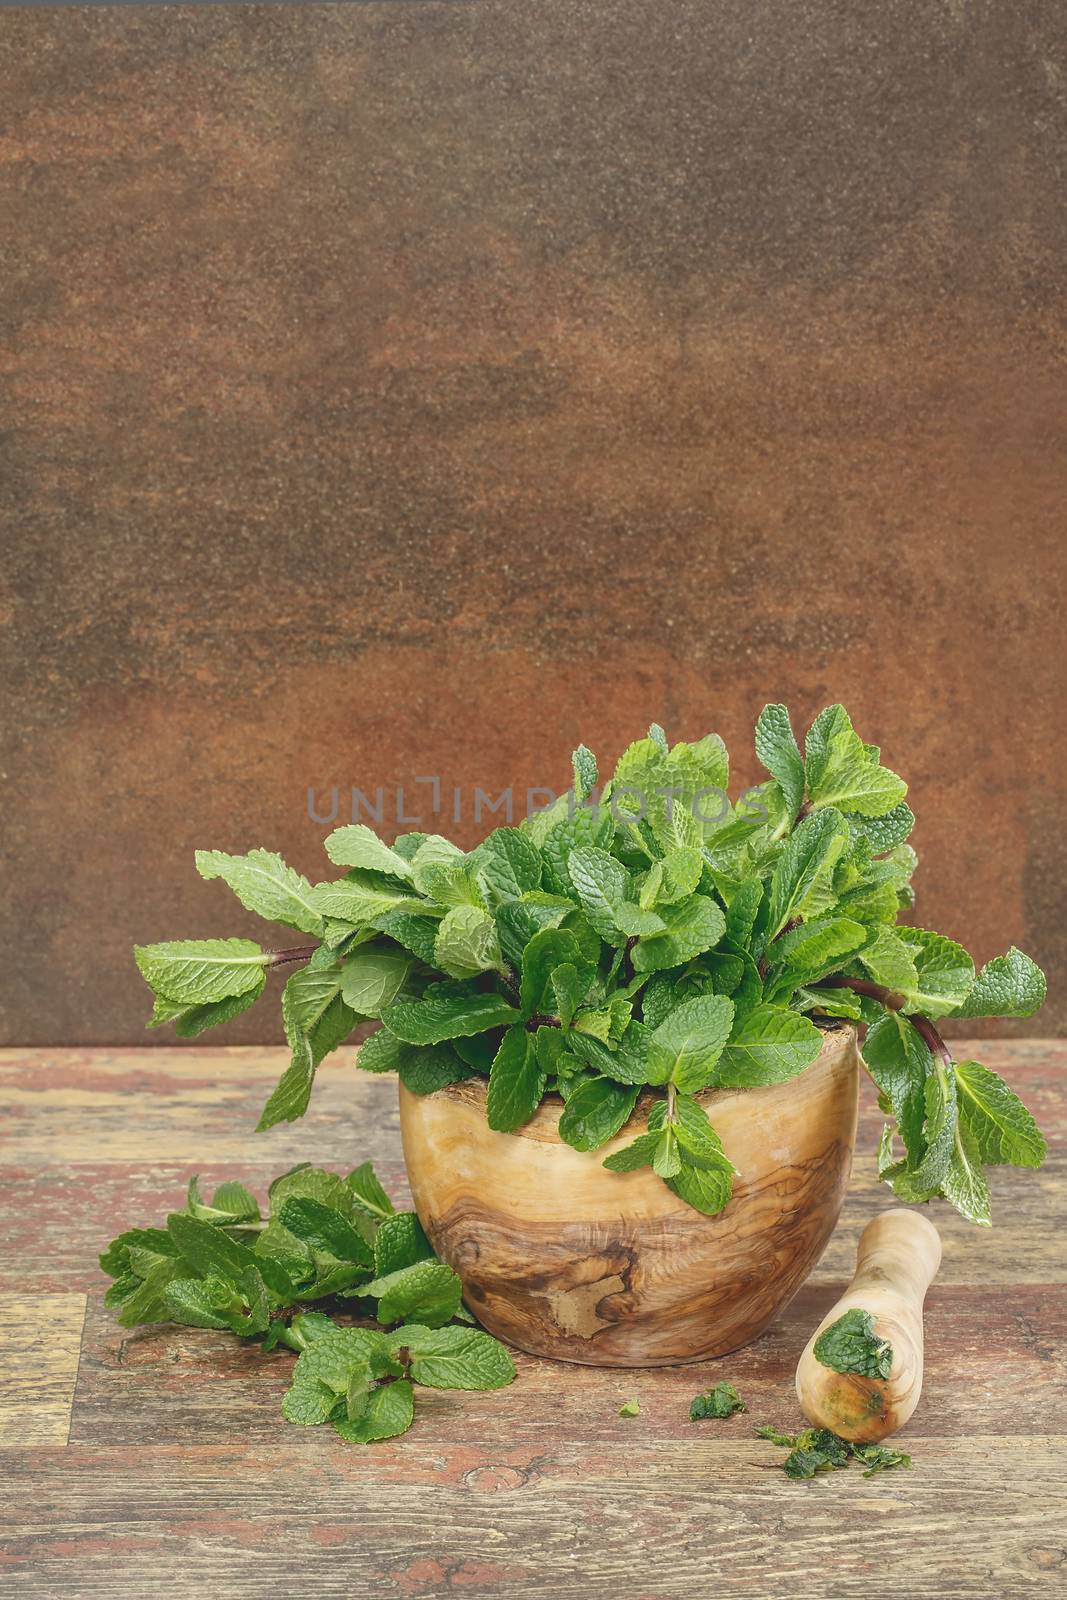 Mortar with fresh mint leaves by Slast20